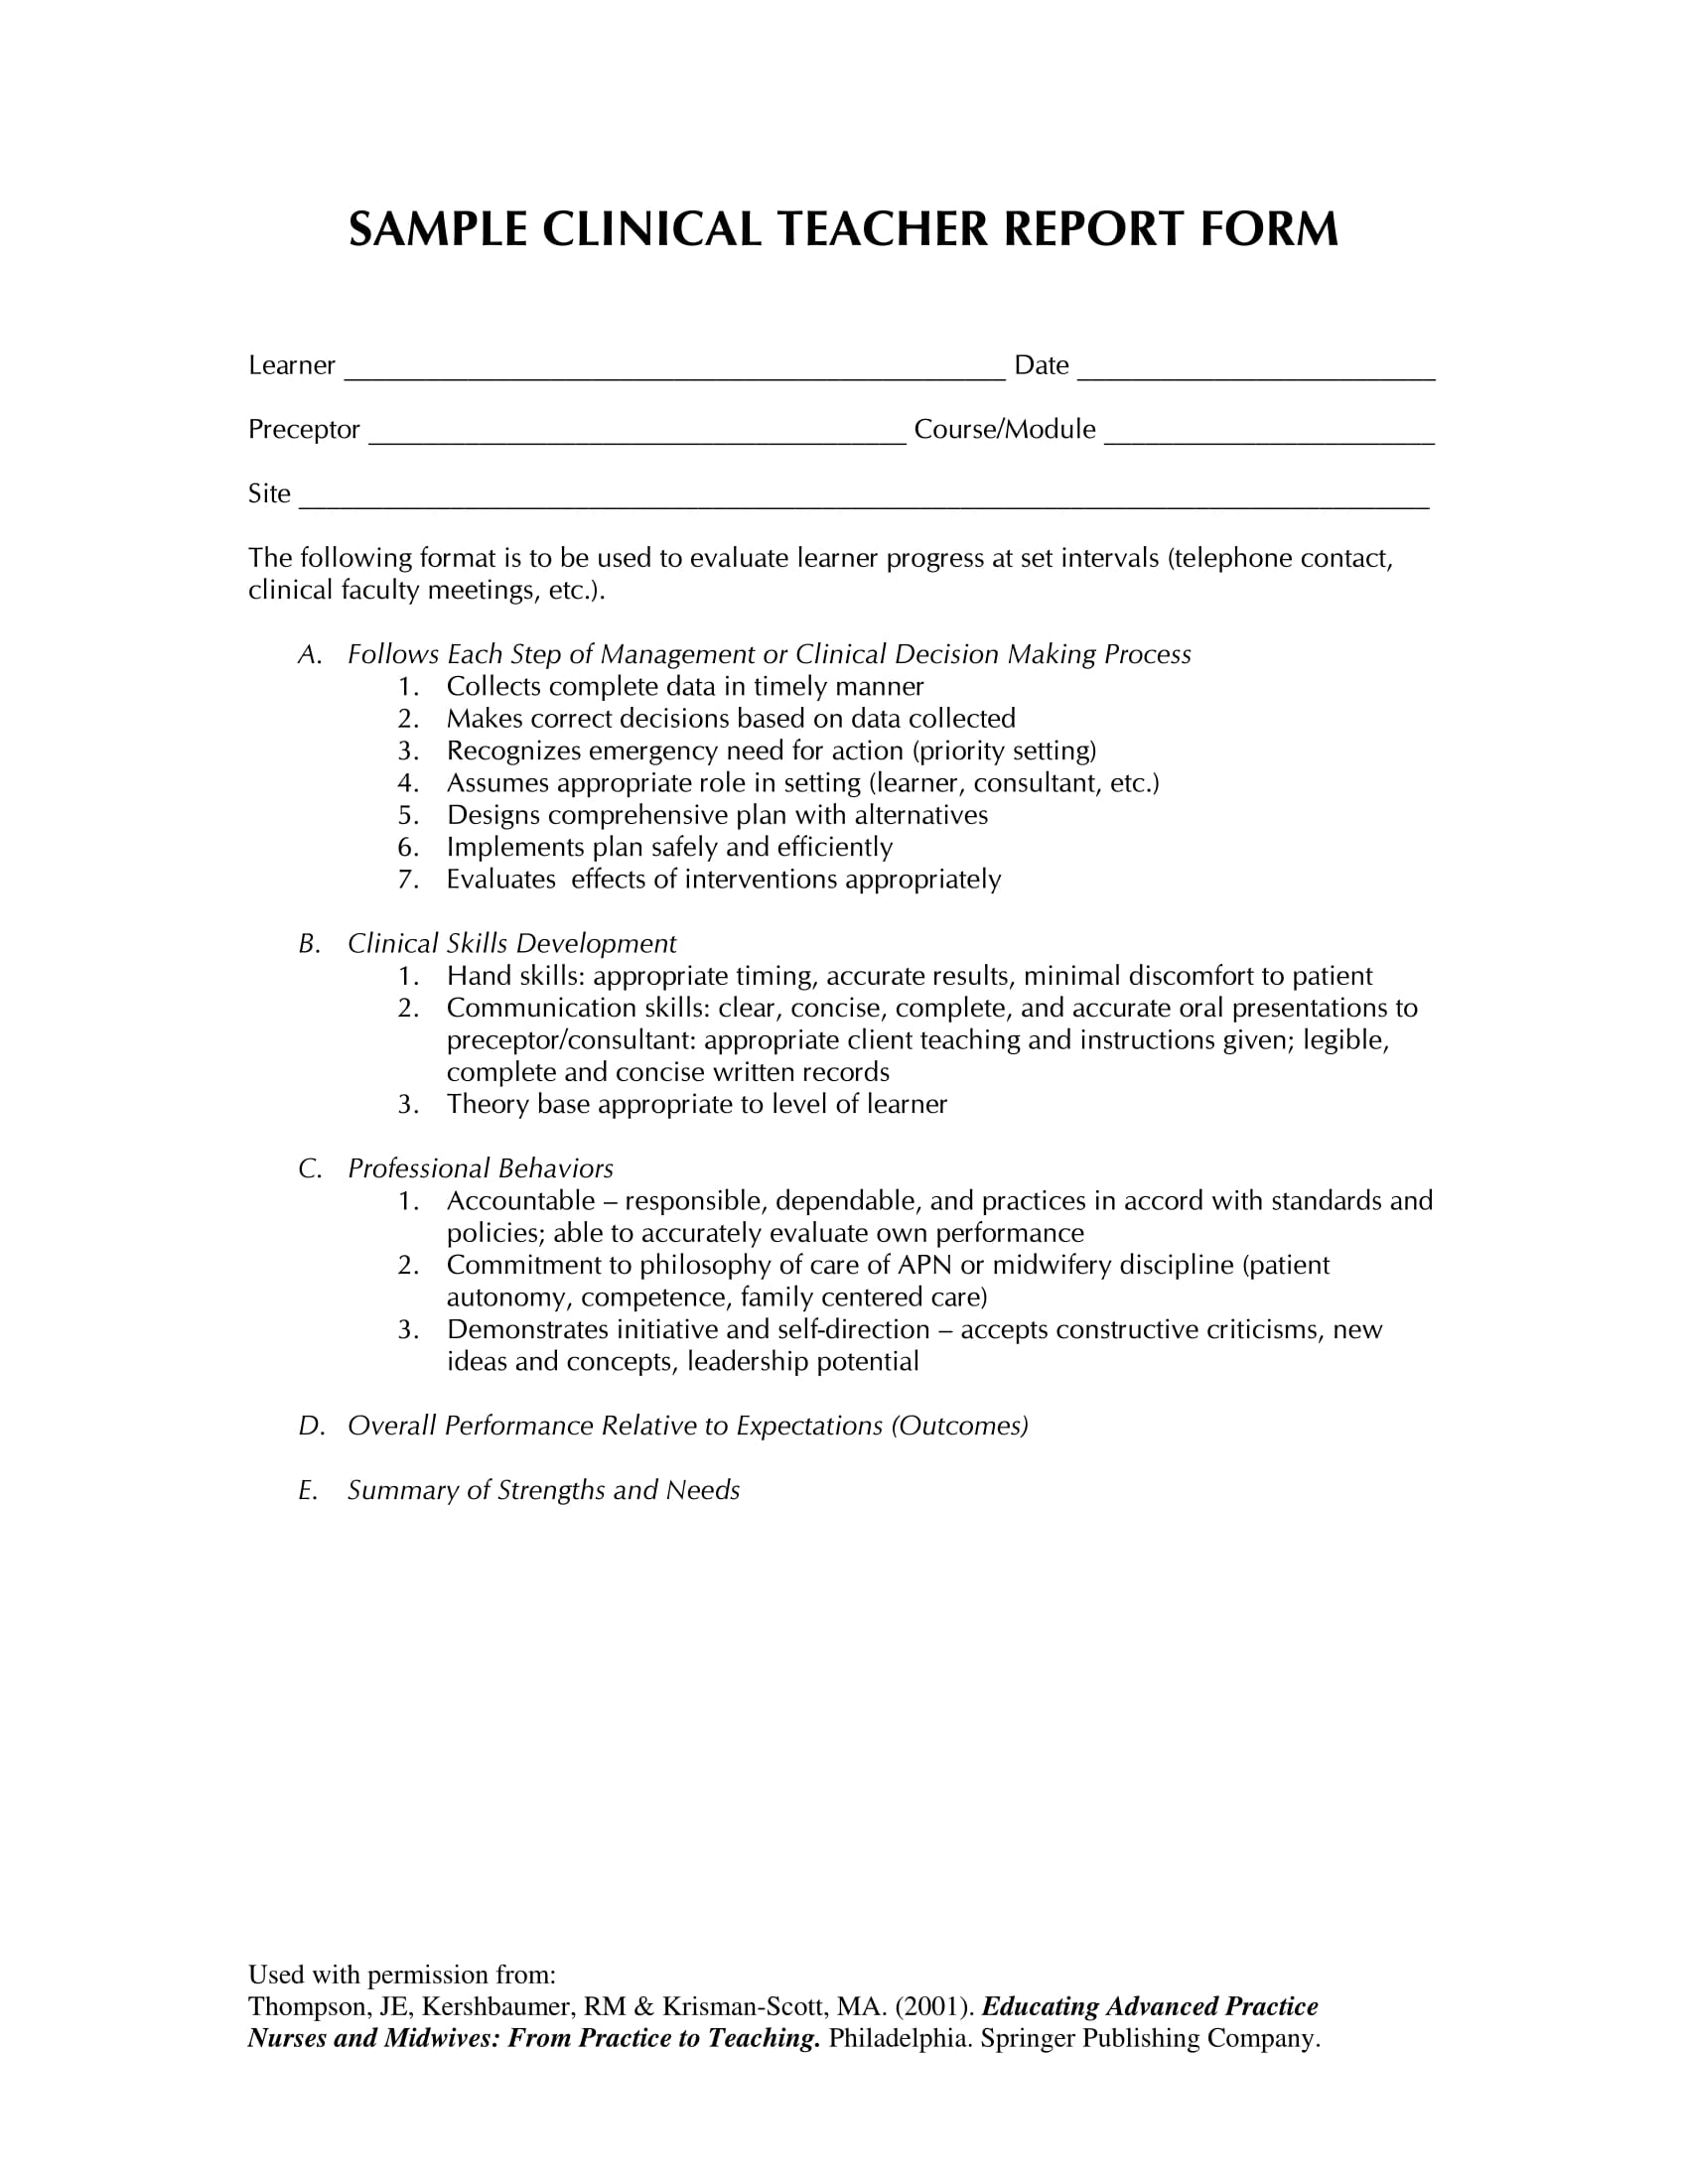 FREE 21+ Teacher Report Forms in PDF For Pupil Report Template